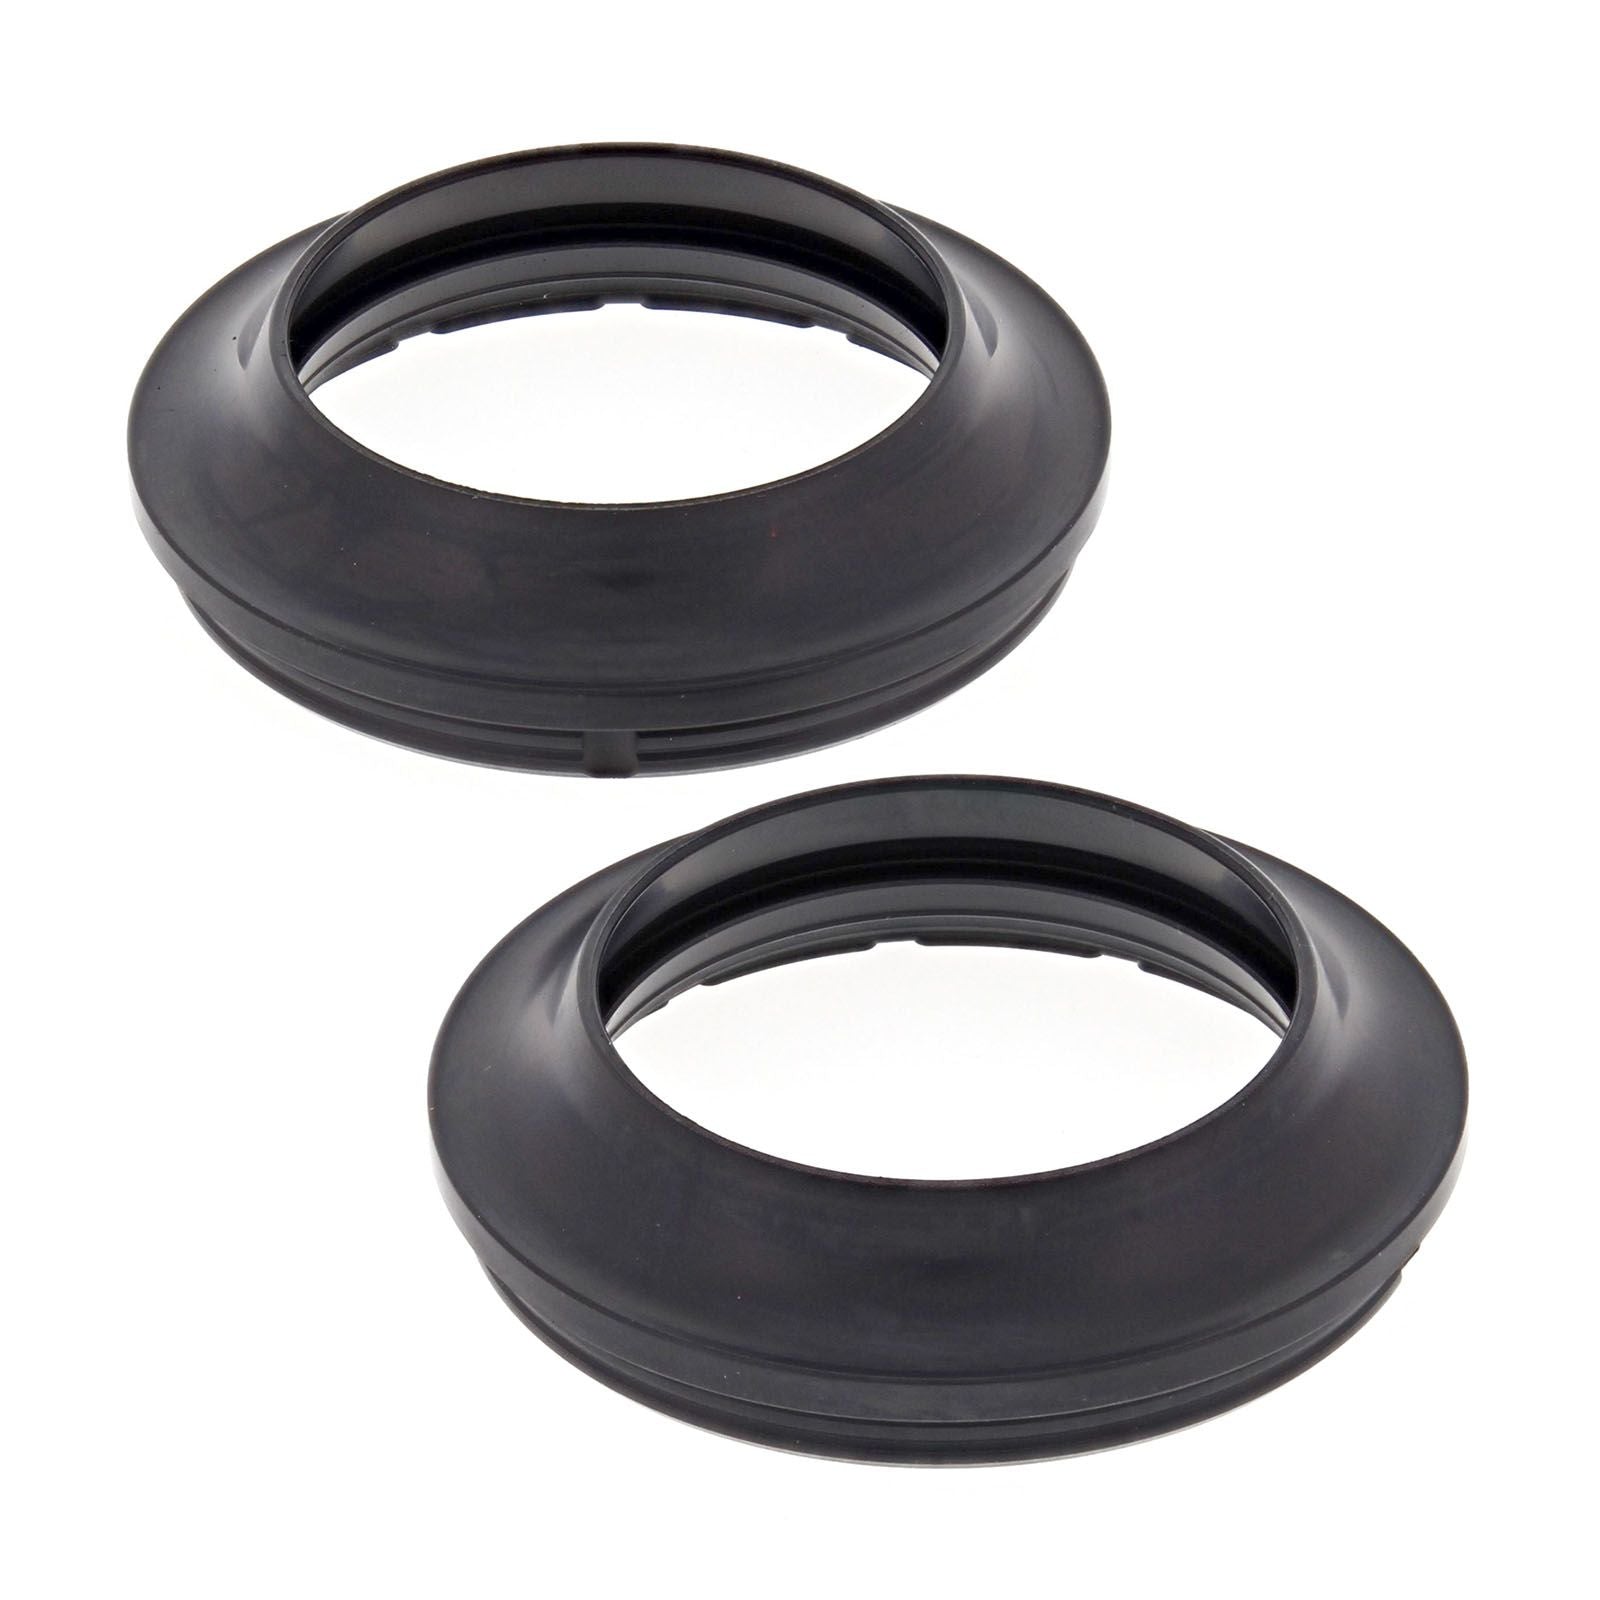 New ALL BALLS Racing Fork Dust Seal Kit #AB57153